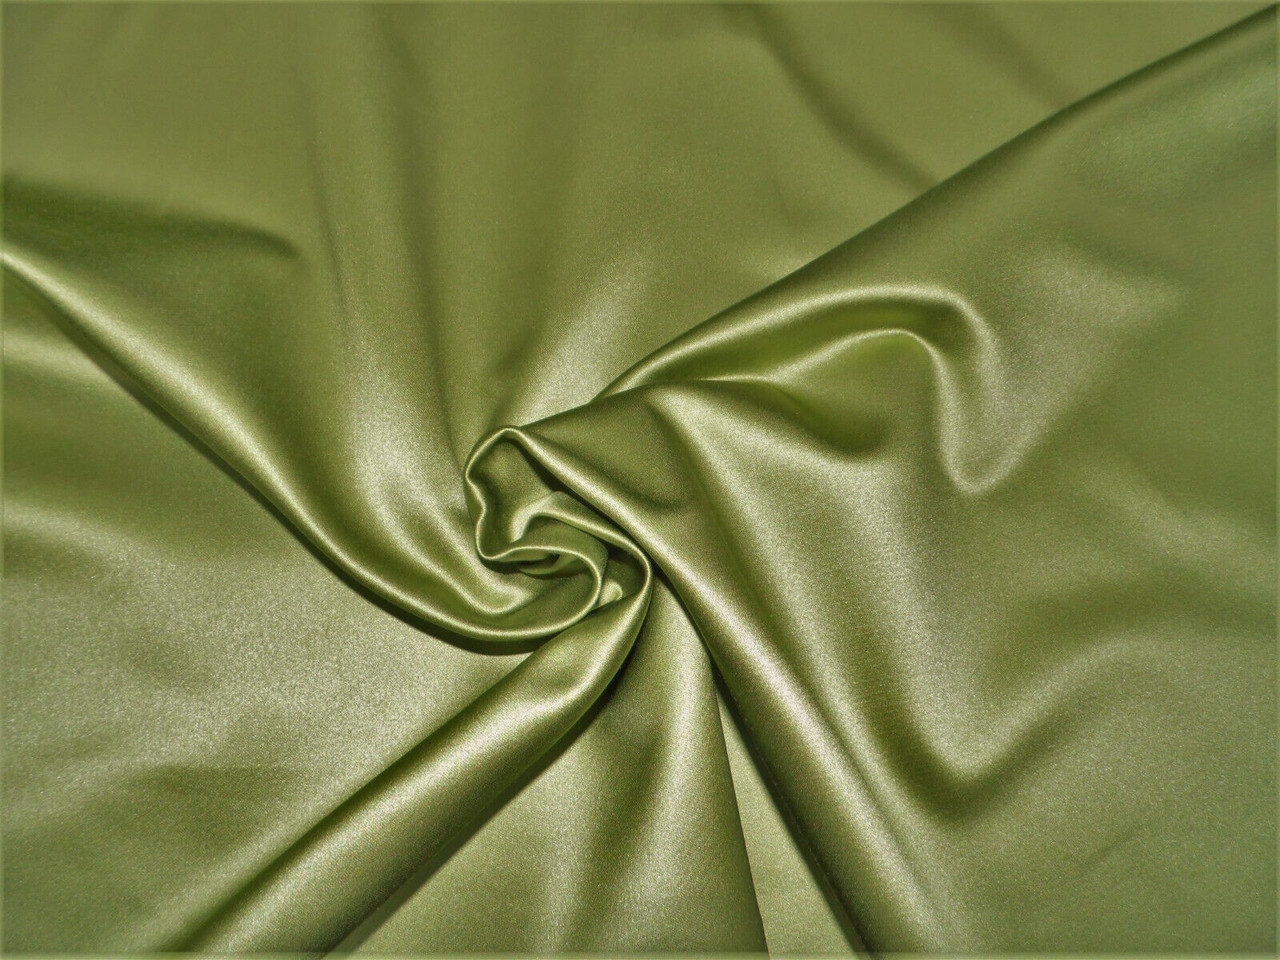 Heritage Fabrics Sateen Cotton Blend Fabric Emory Chive Green Apparel FF54